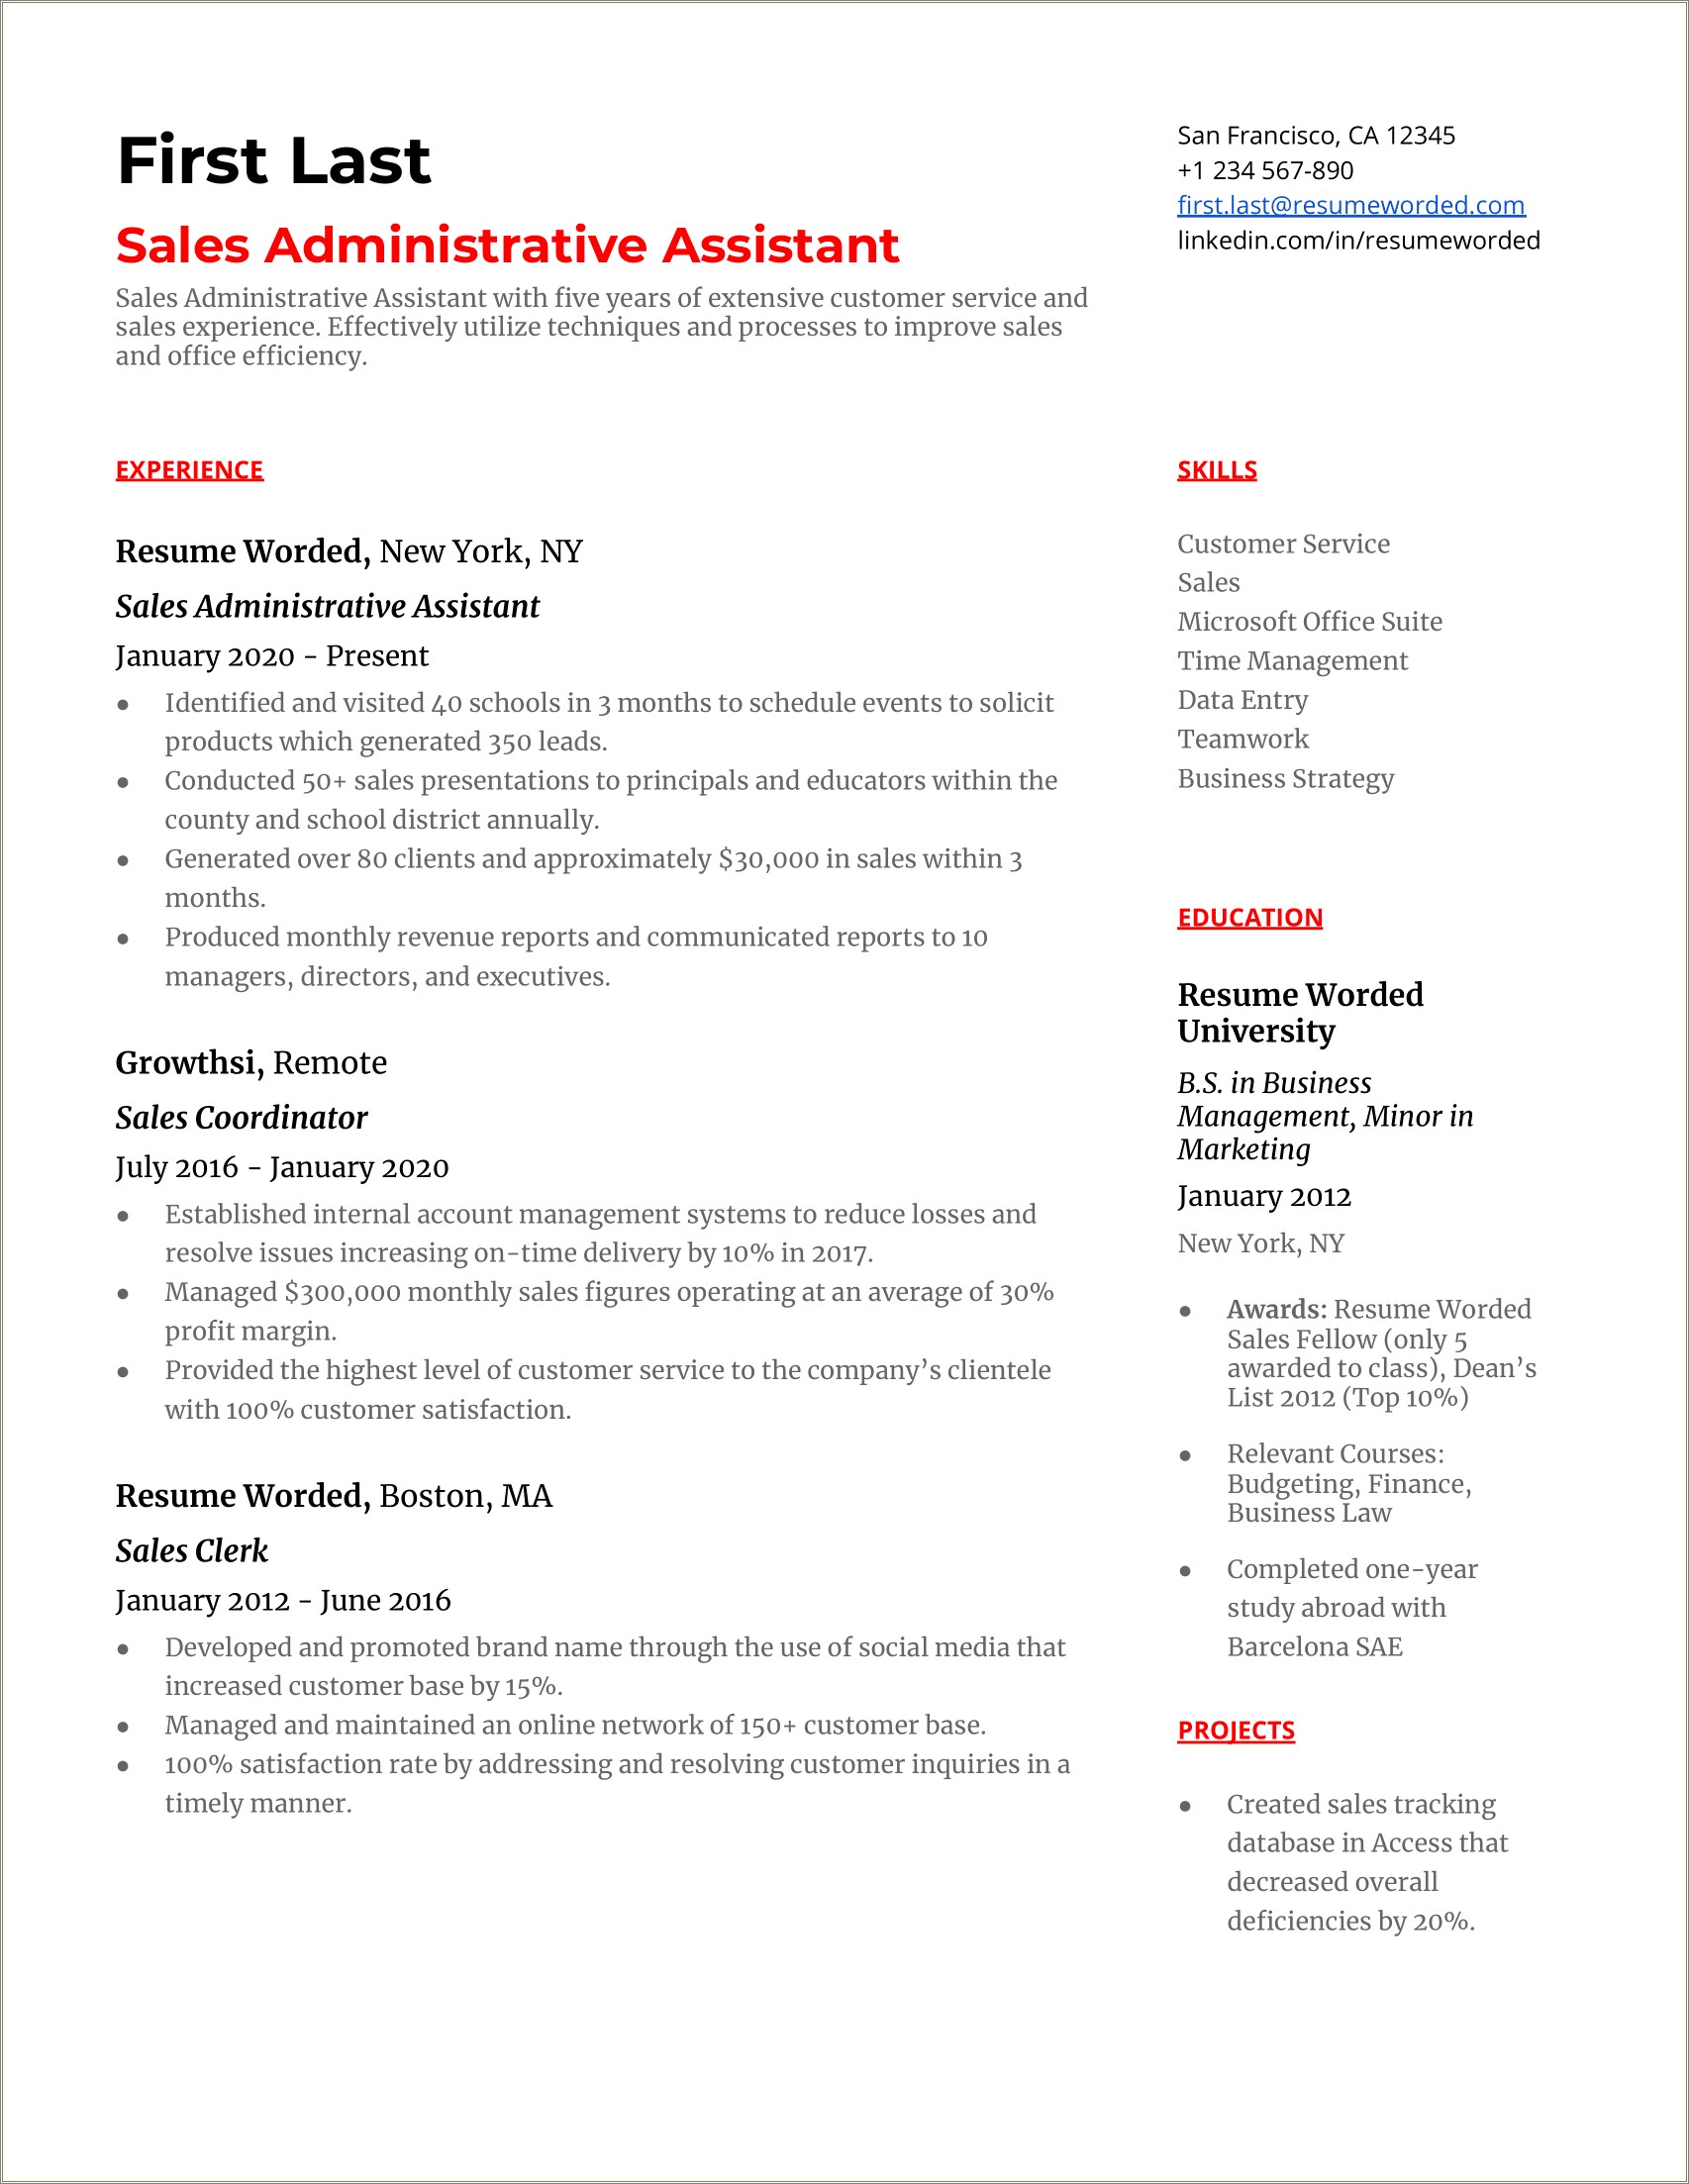 Sample Resume Entry Level Administrative Assistant